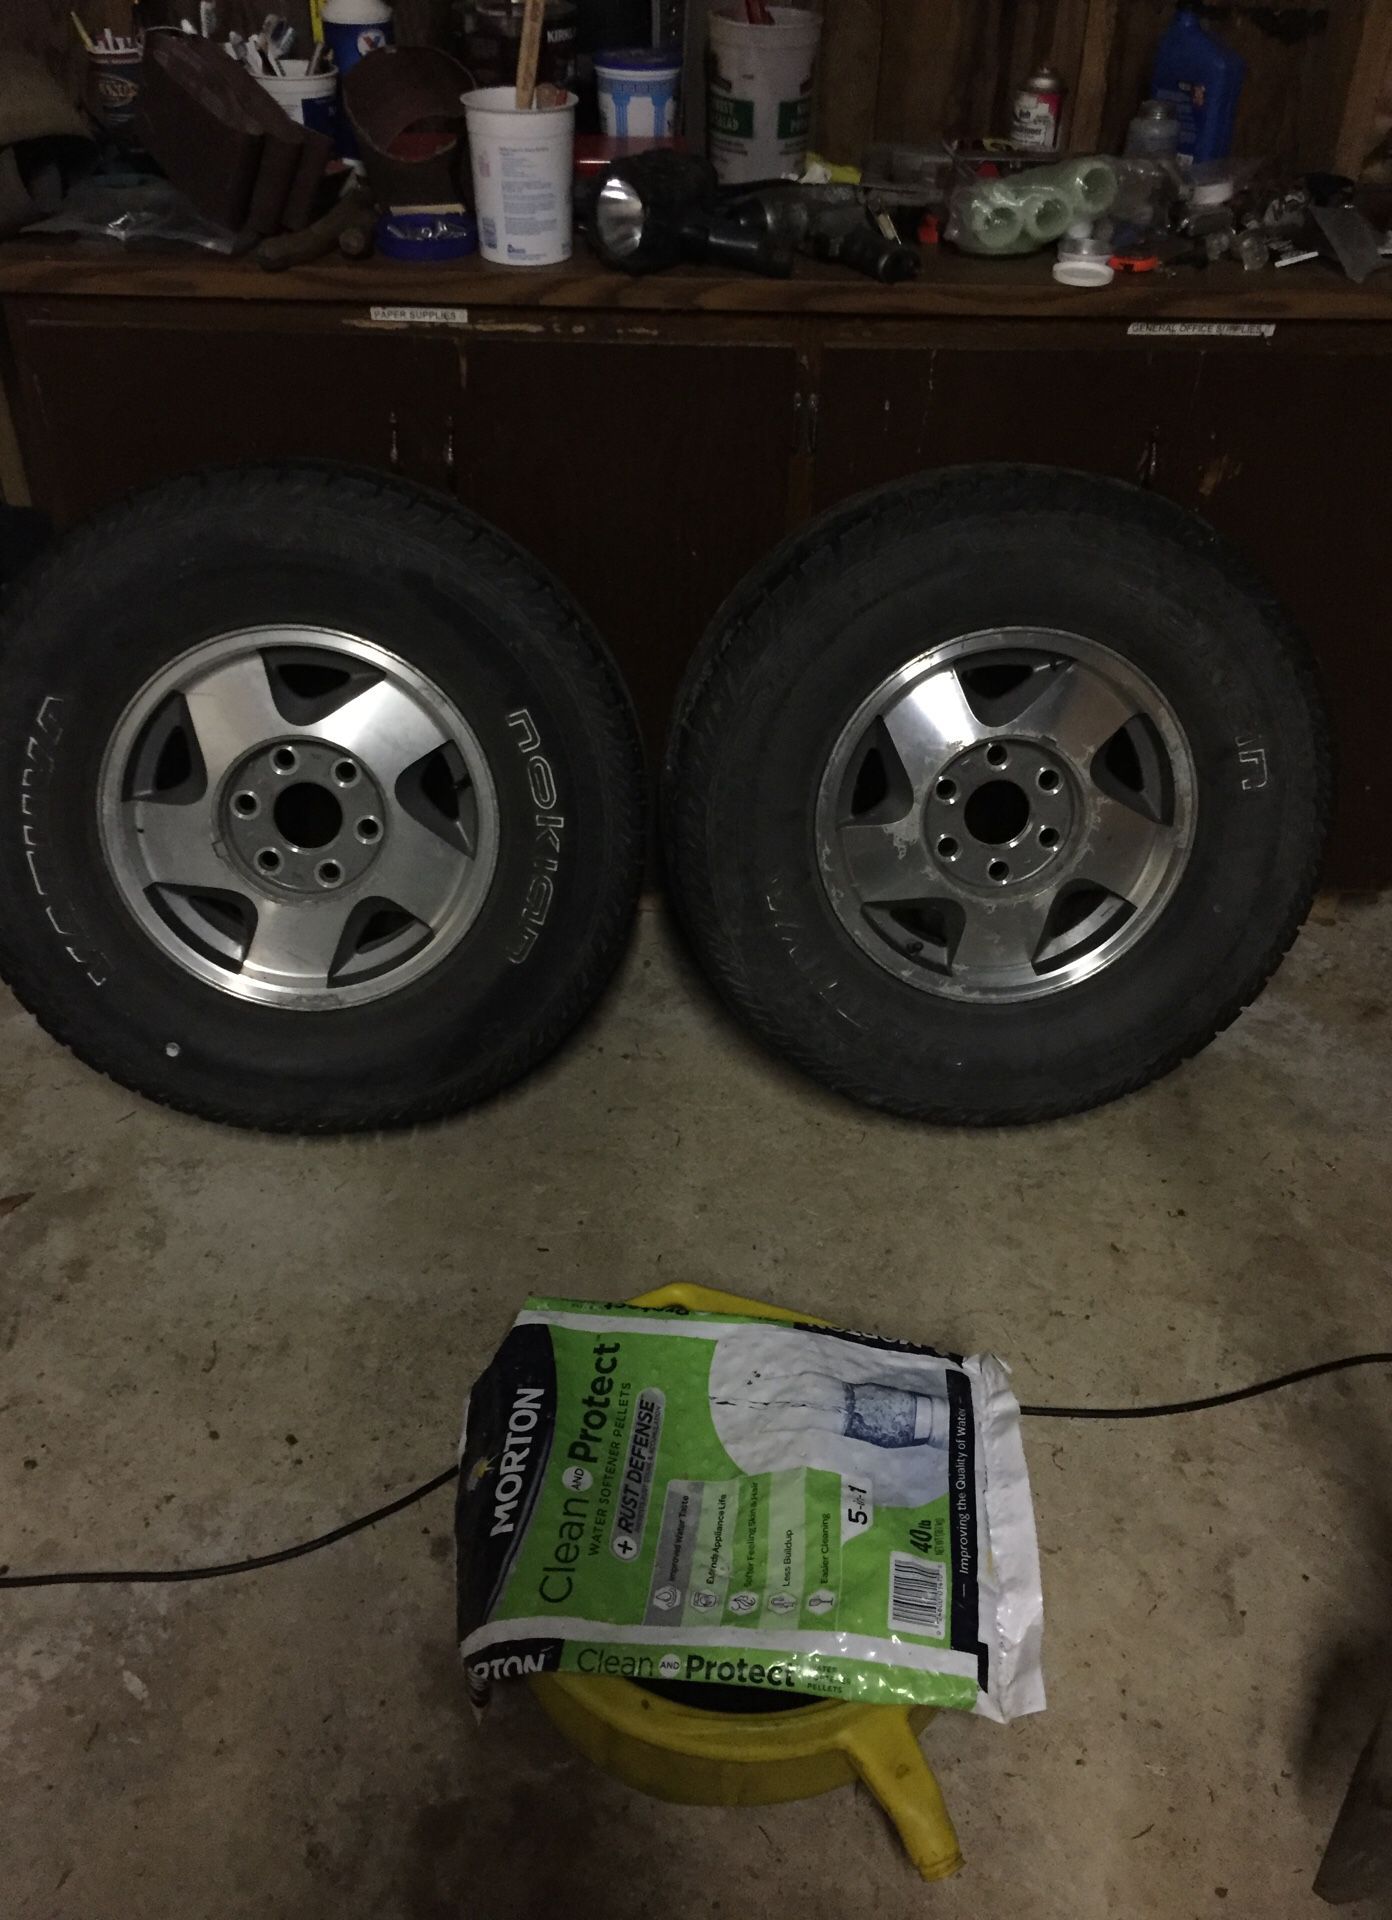 GMC/ Chevy 16 inch wheels and tires ) 4 total okay condition, two different brand of tire’s ) no holes but seem to slowly leak air. $15 ea obo